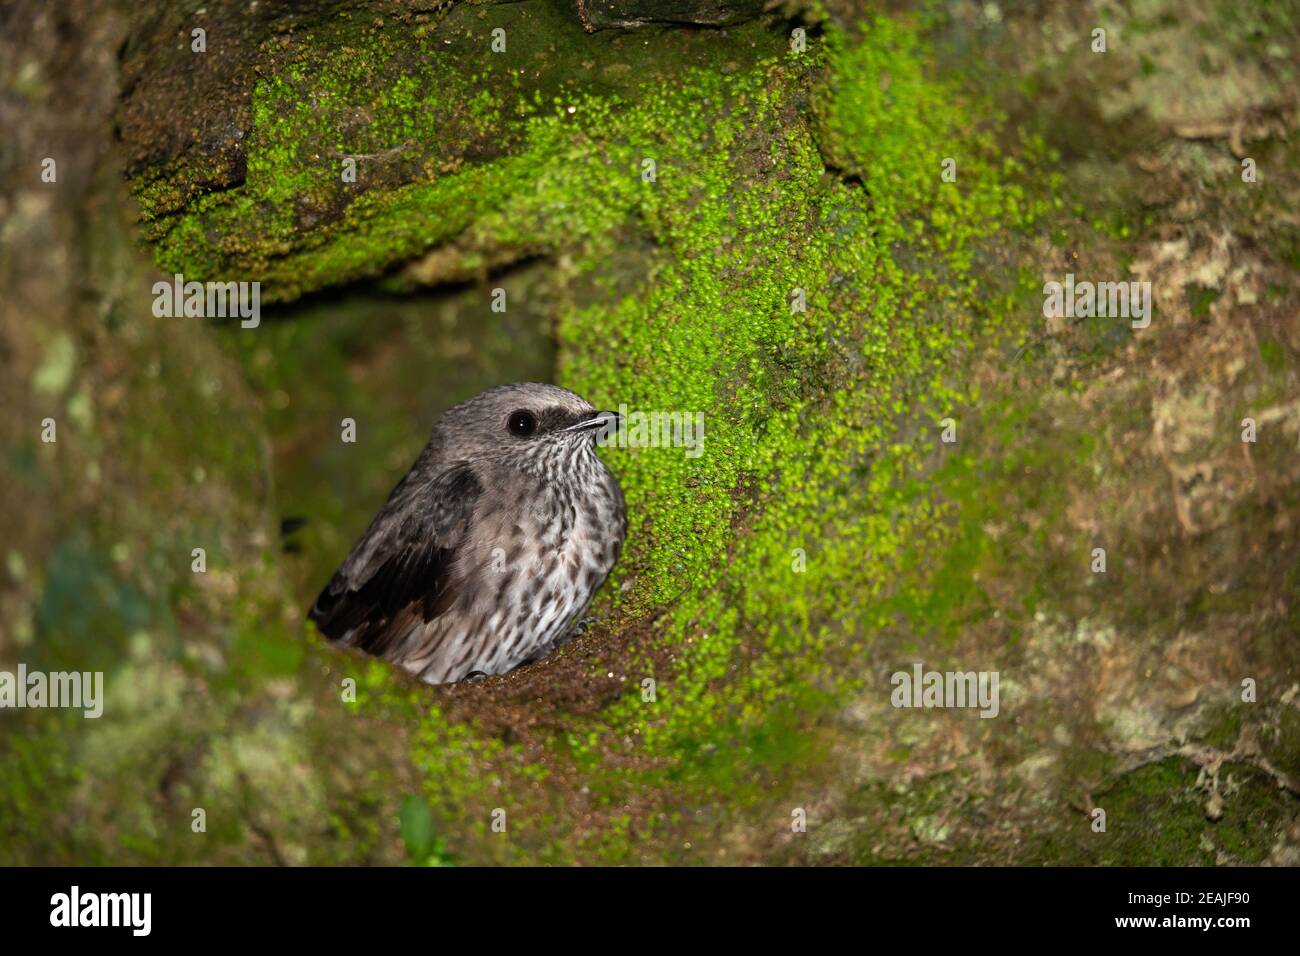 A small gray native bird in its nest Stock Photo